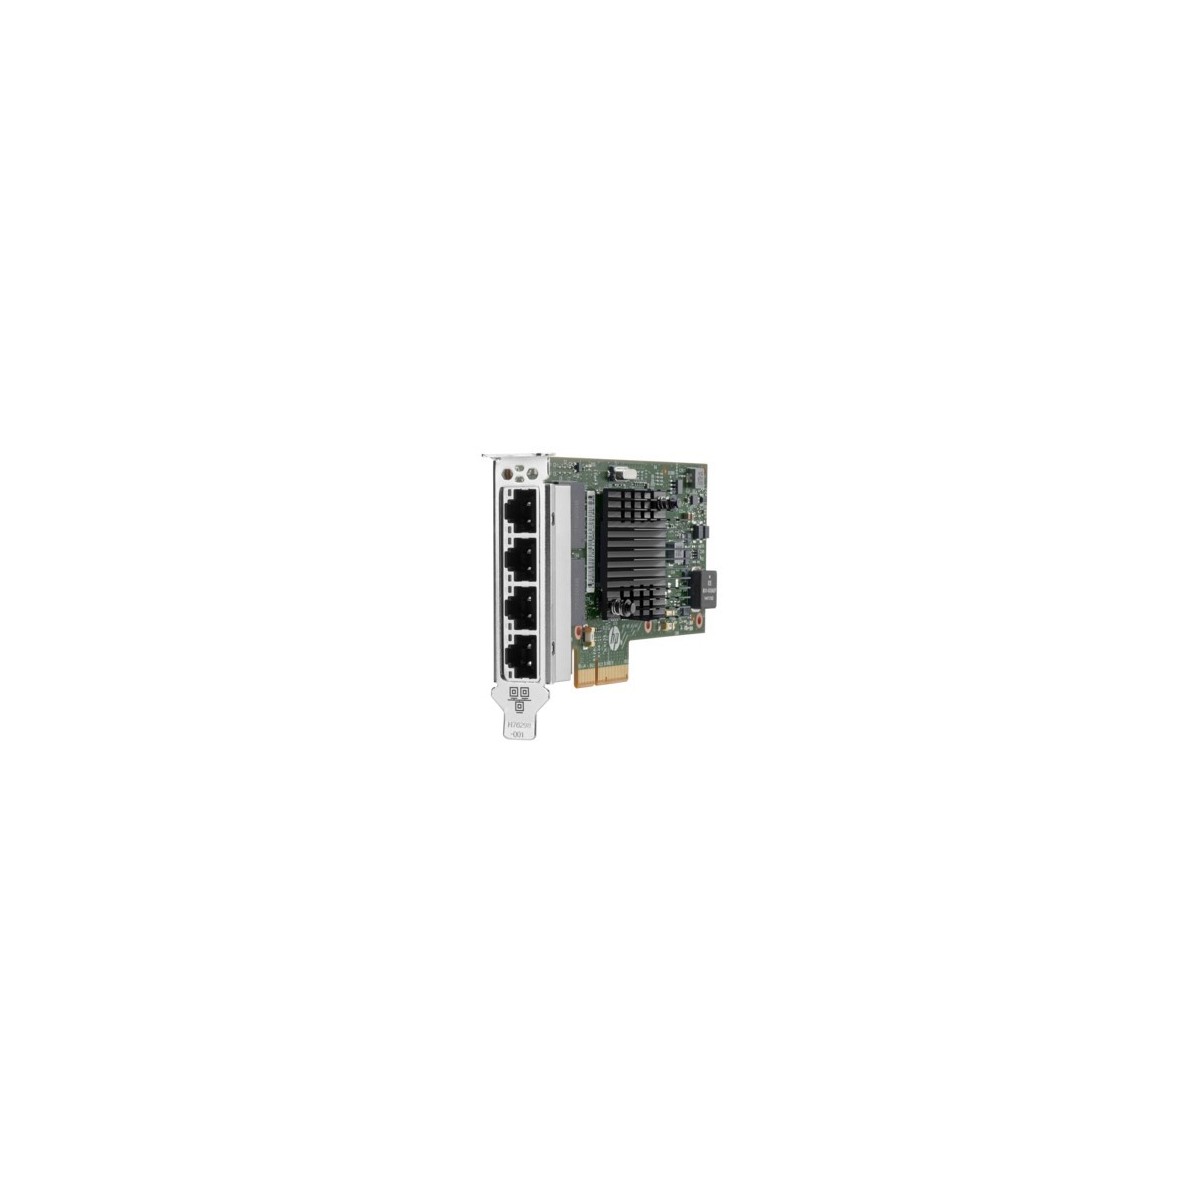 Ethernet - 366T - 1 Gbps - PCI Express 2.1 x4 low profile - GigE